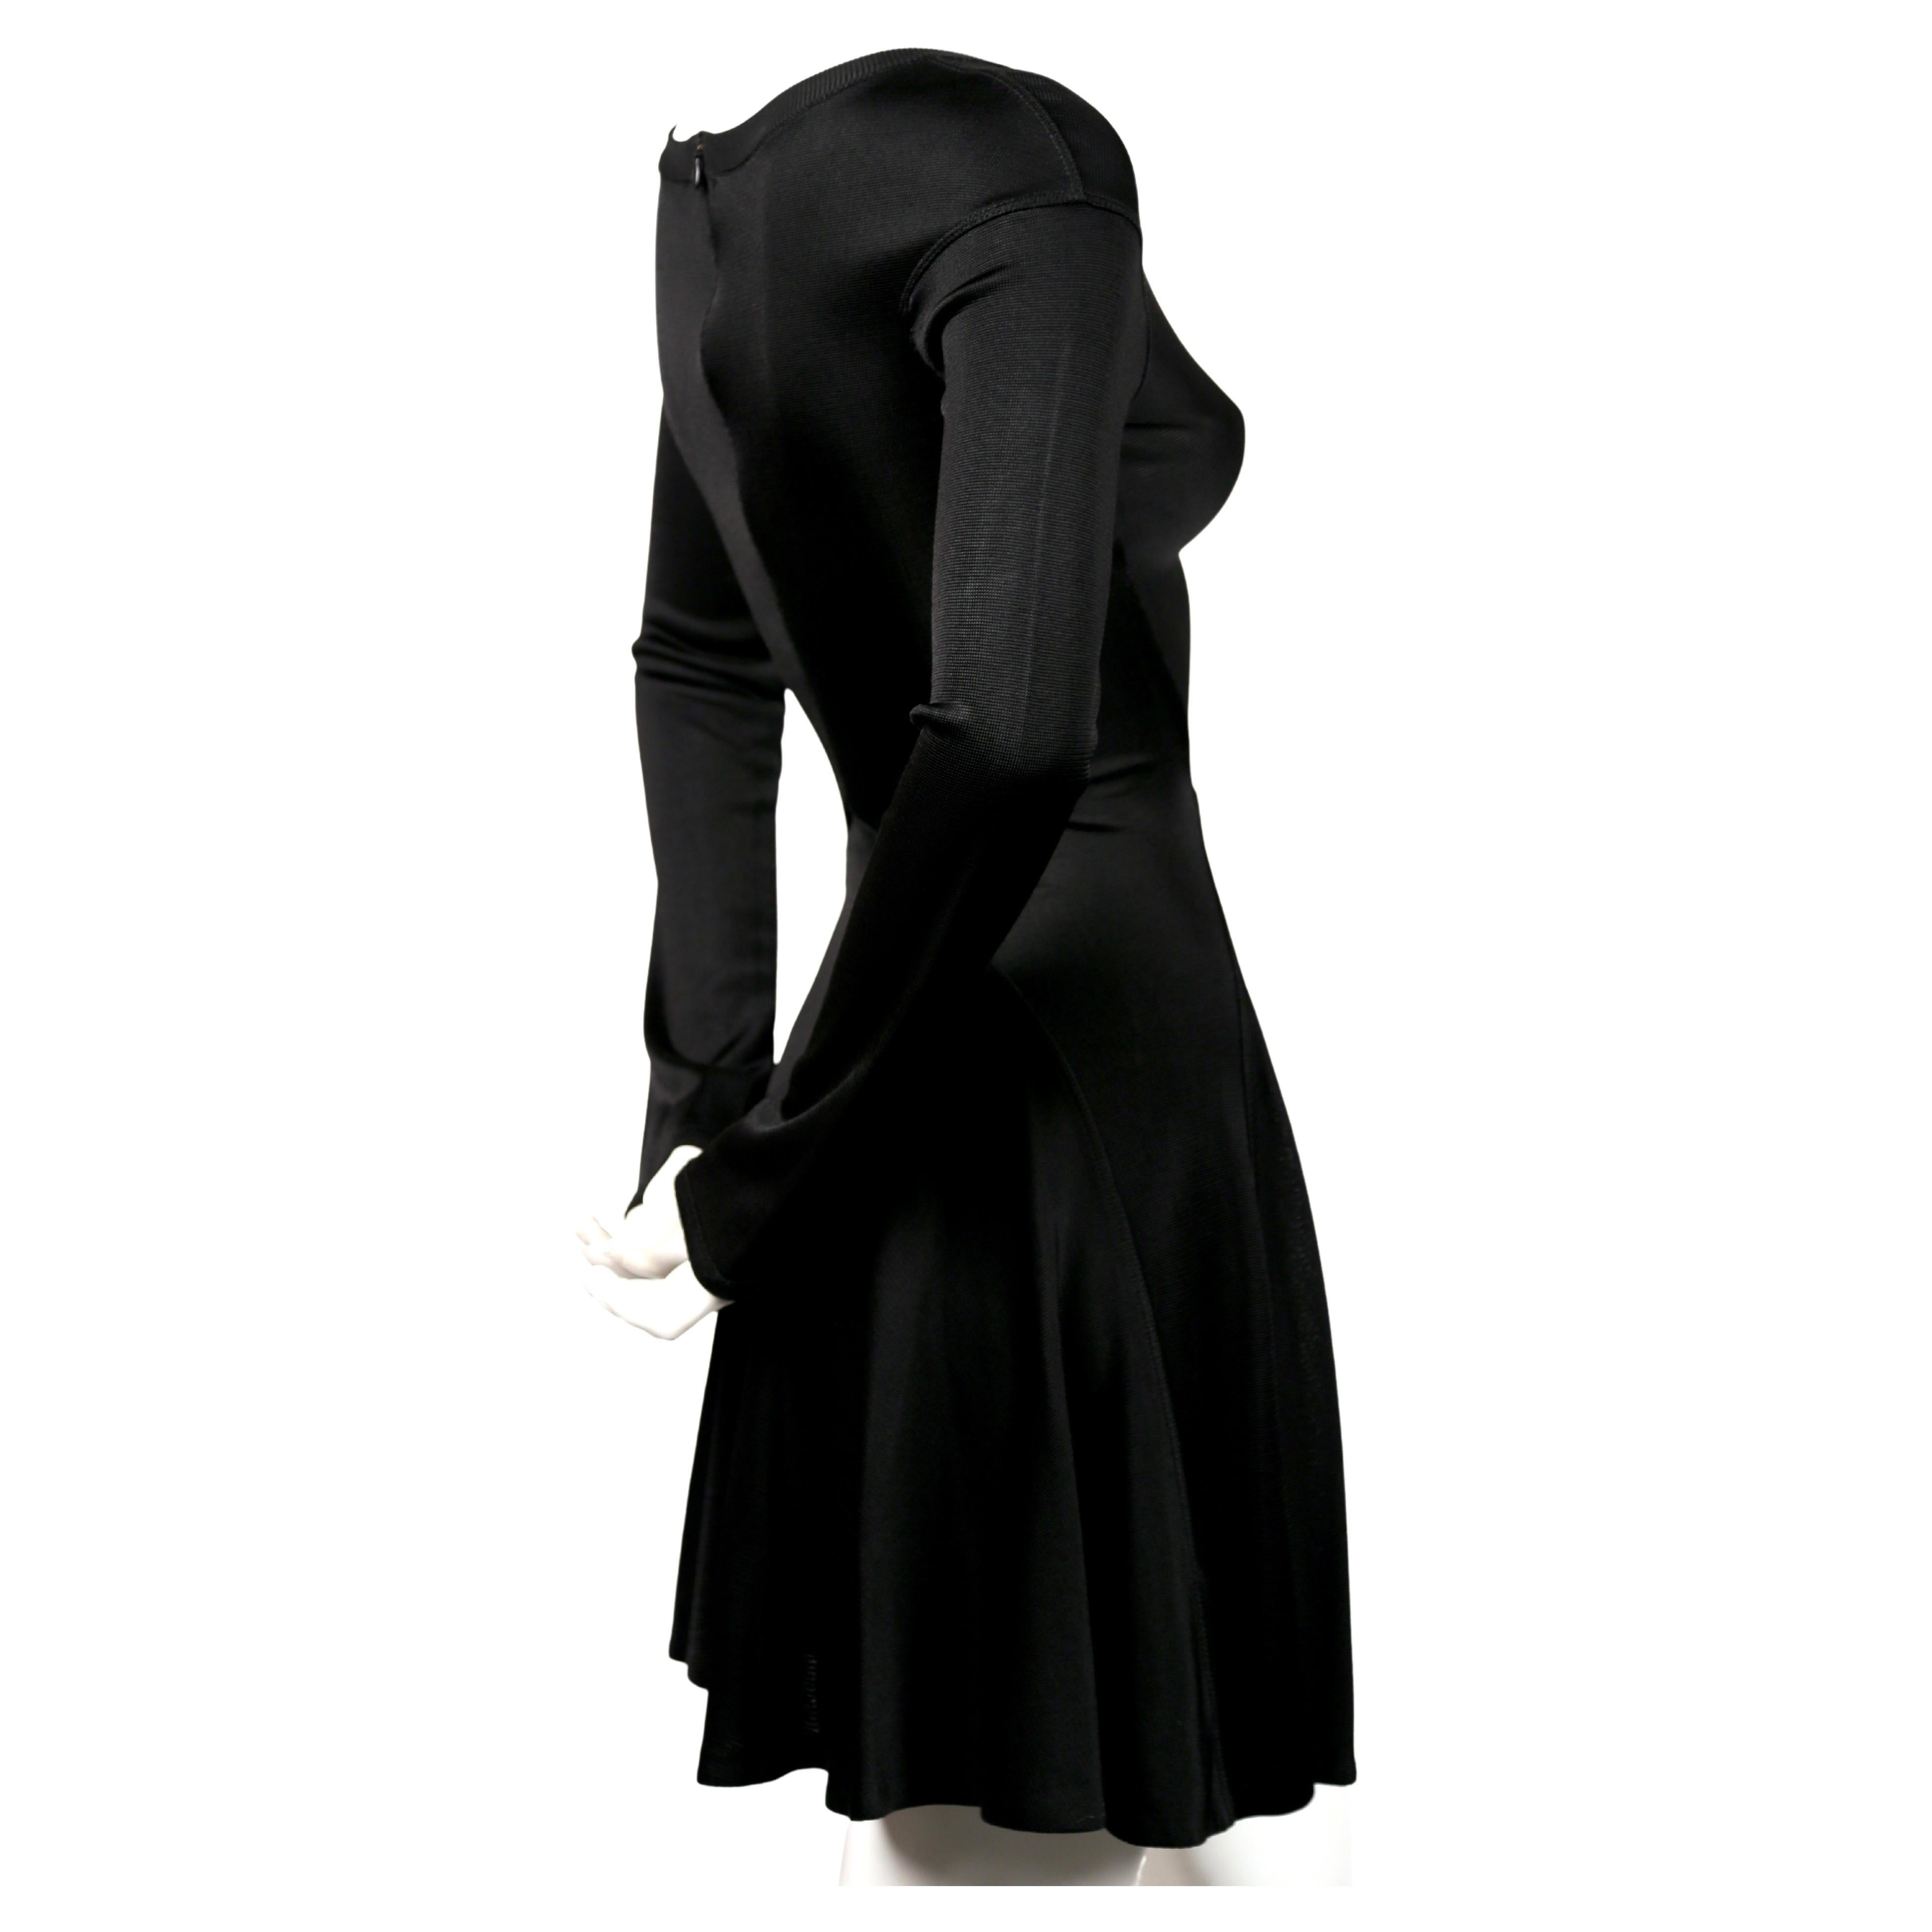 Incredibly flattering, jet-black, seamed dress with full skirt from Azzedine Alaia dating to approximately 1990. Size XS. Approximate measurements (unstretched): drop shoulder 17